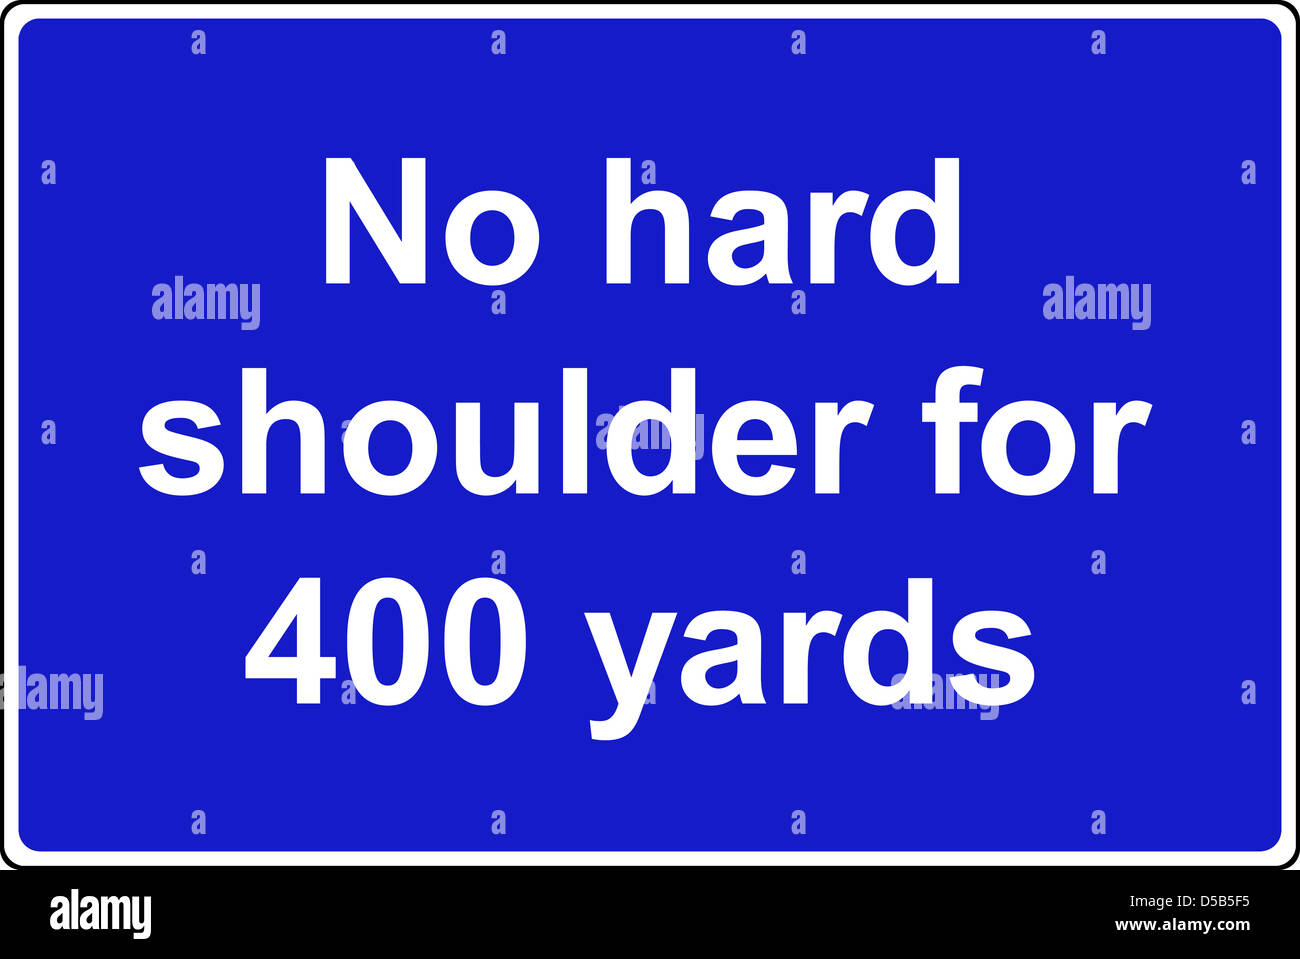 No hard shoulder for 400 yards ahead motorway sign Stock Photo